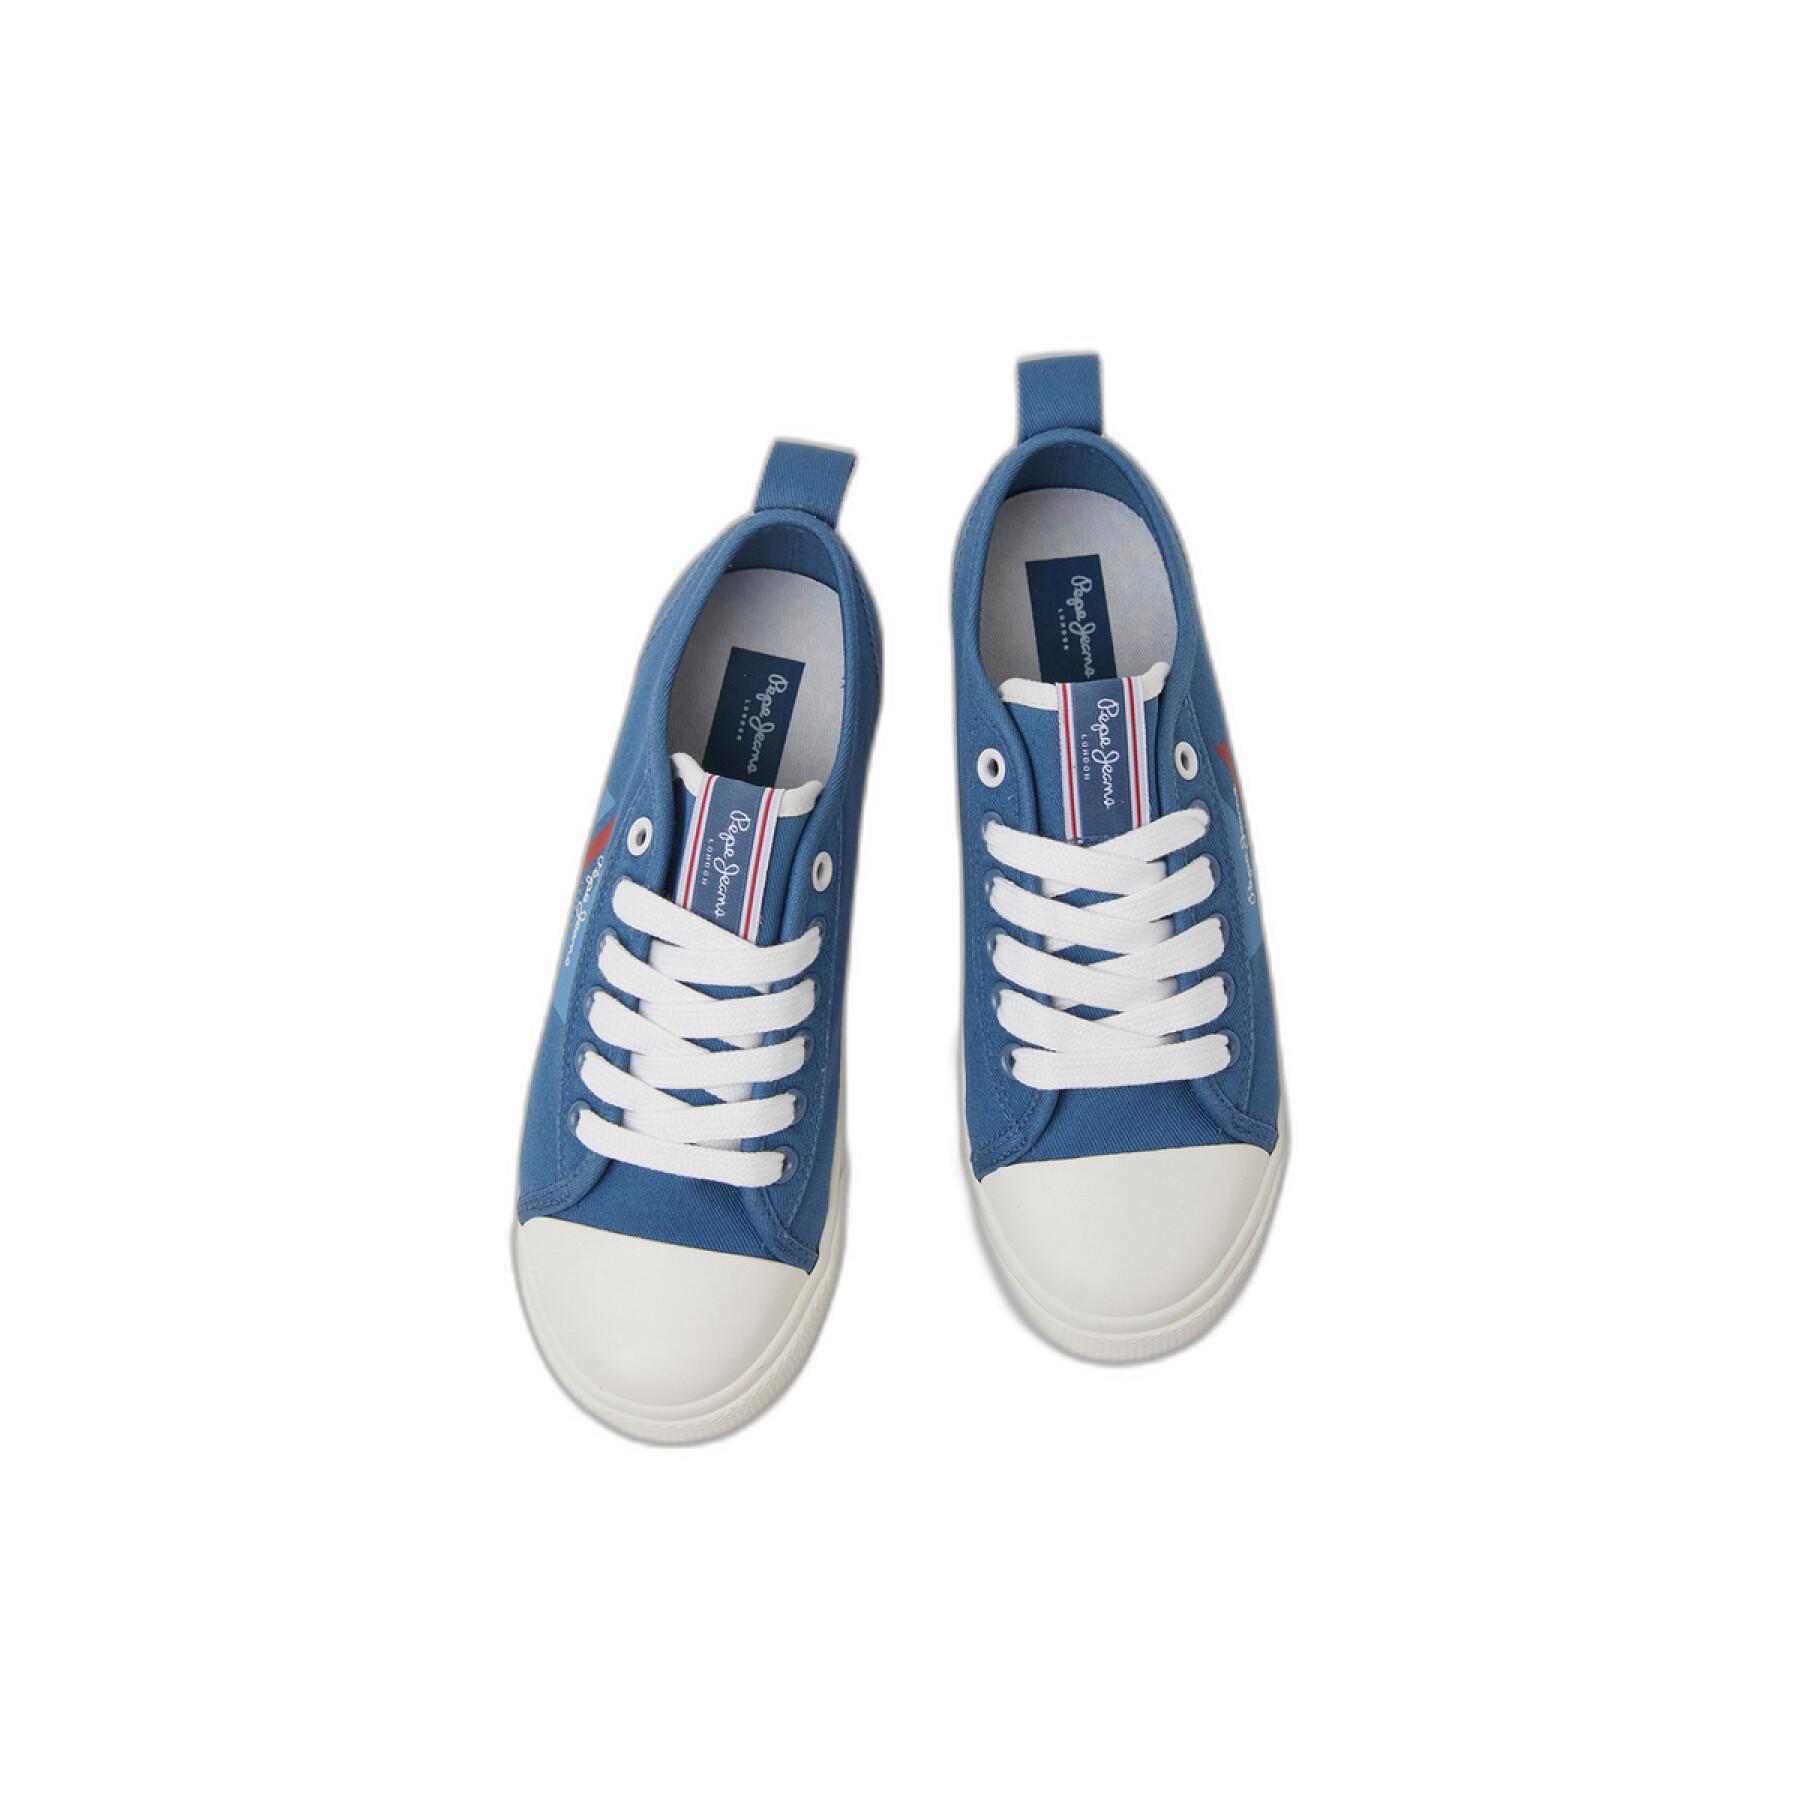 Girl sneakers Pepe Jeans Allen Flag Color